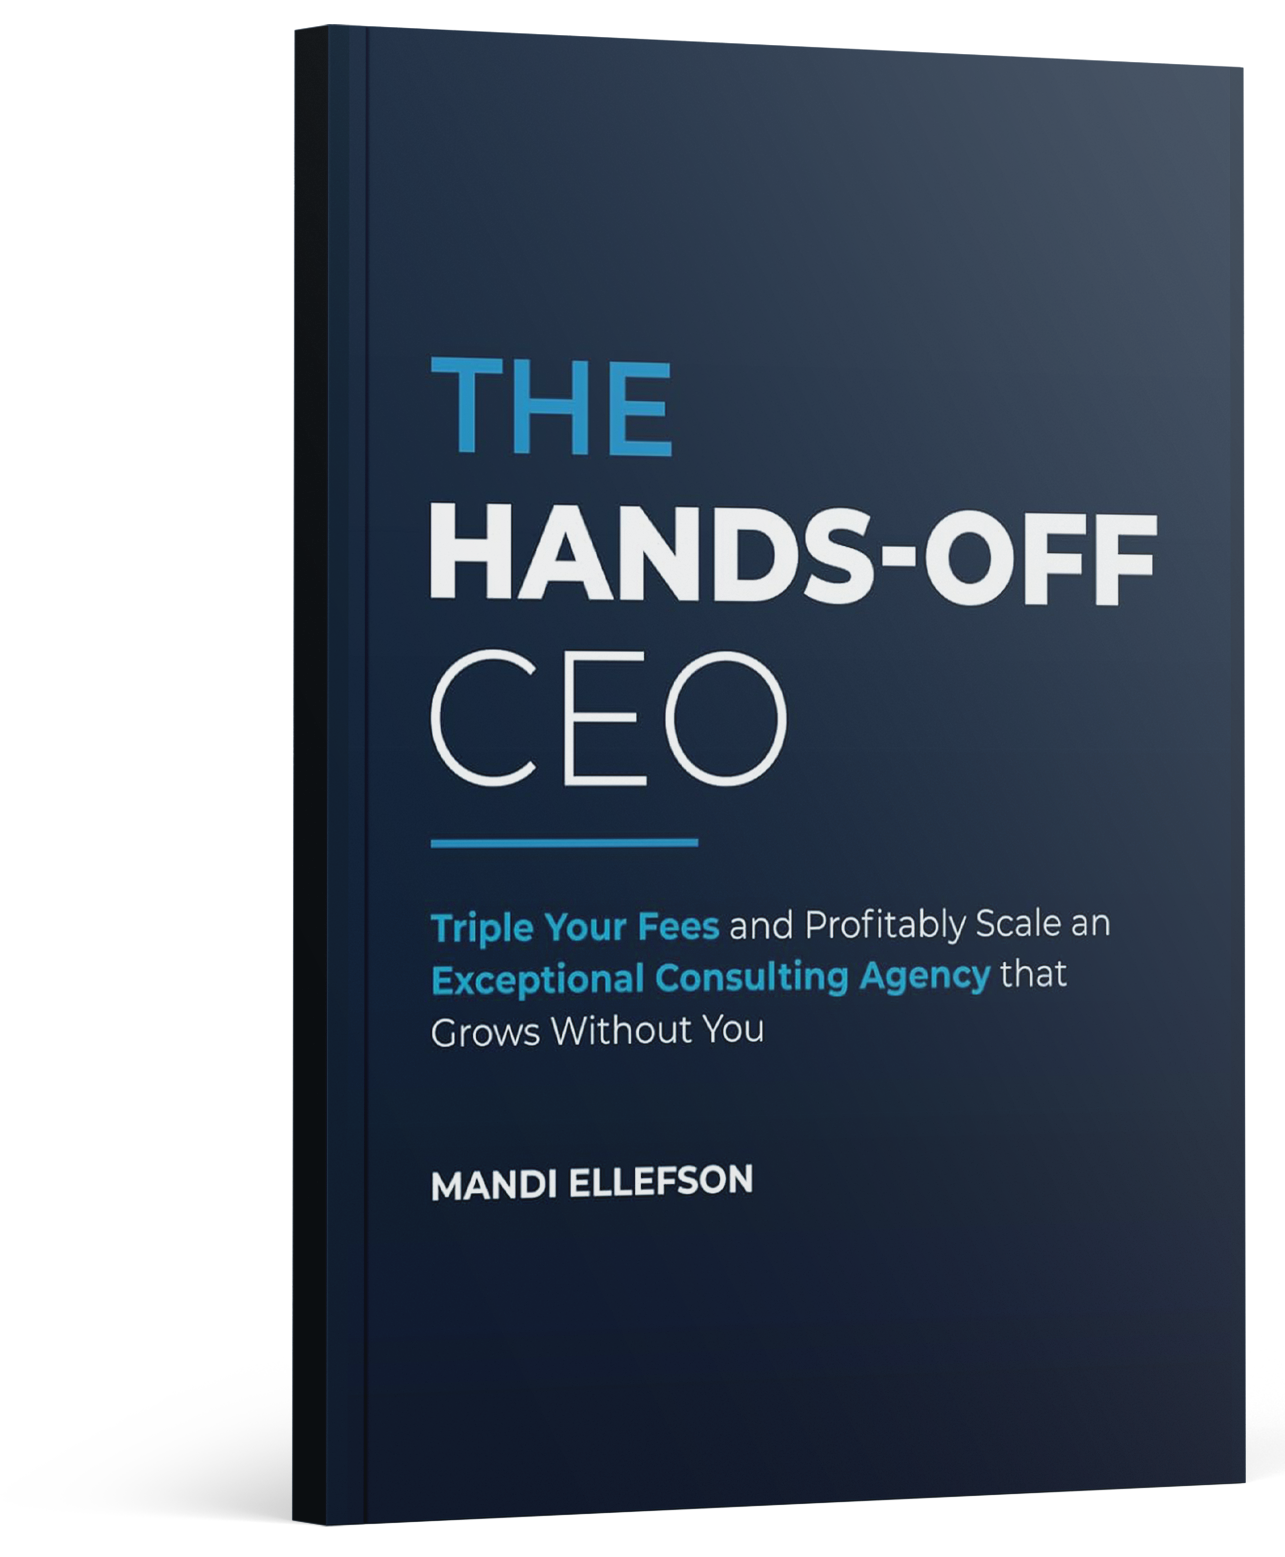 The Hands-Off CEO book cover